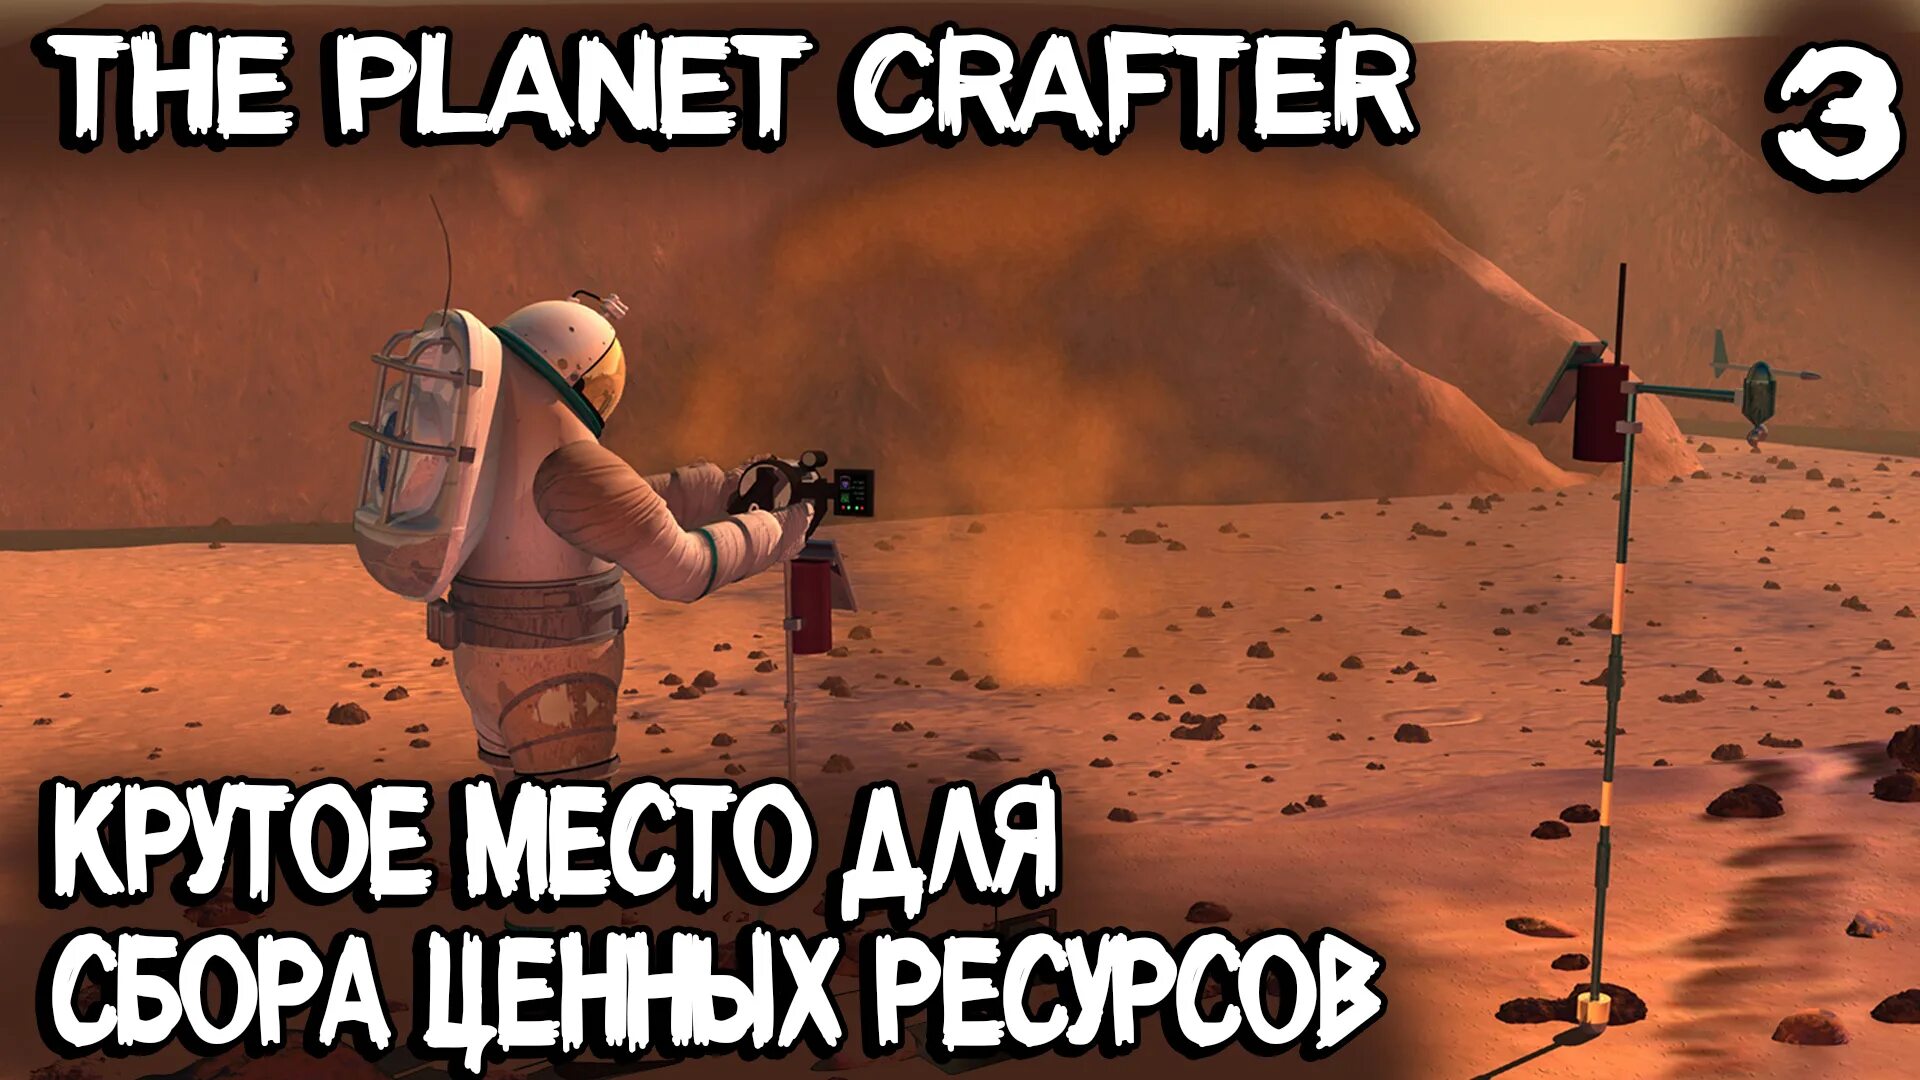 Planet crafter где уран. The Planet Crafter суперсплав. Planet Crafter золотые ящики. Planet Crafter карта ресурсов. Planet Crafter Уран.